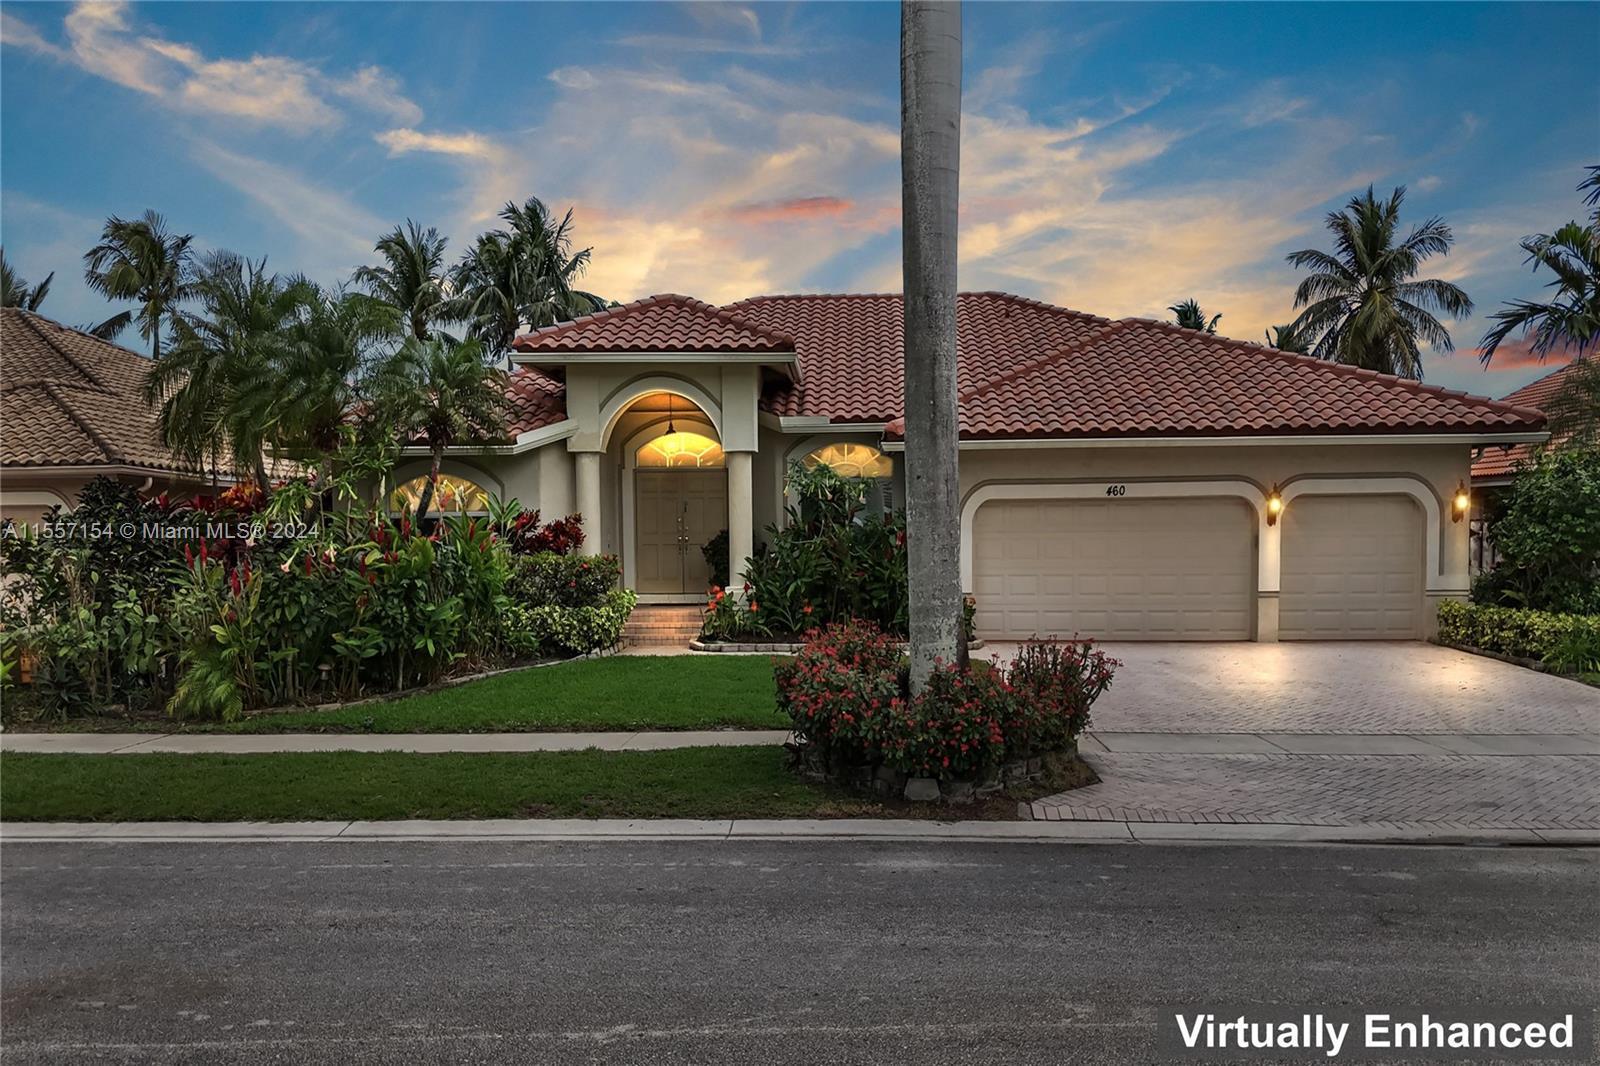 Photo of 460 NW 110th Ave in Plantation, FL